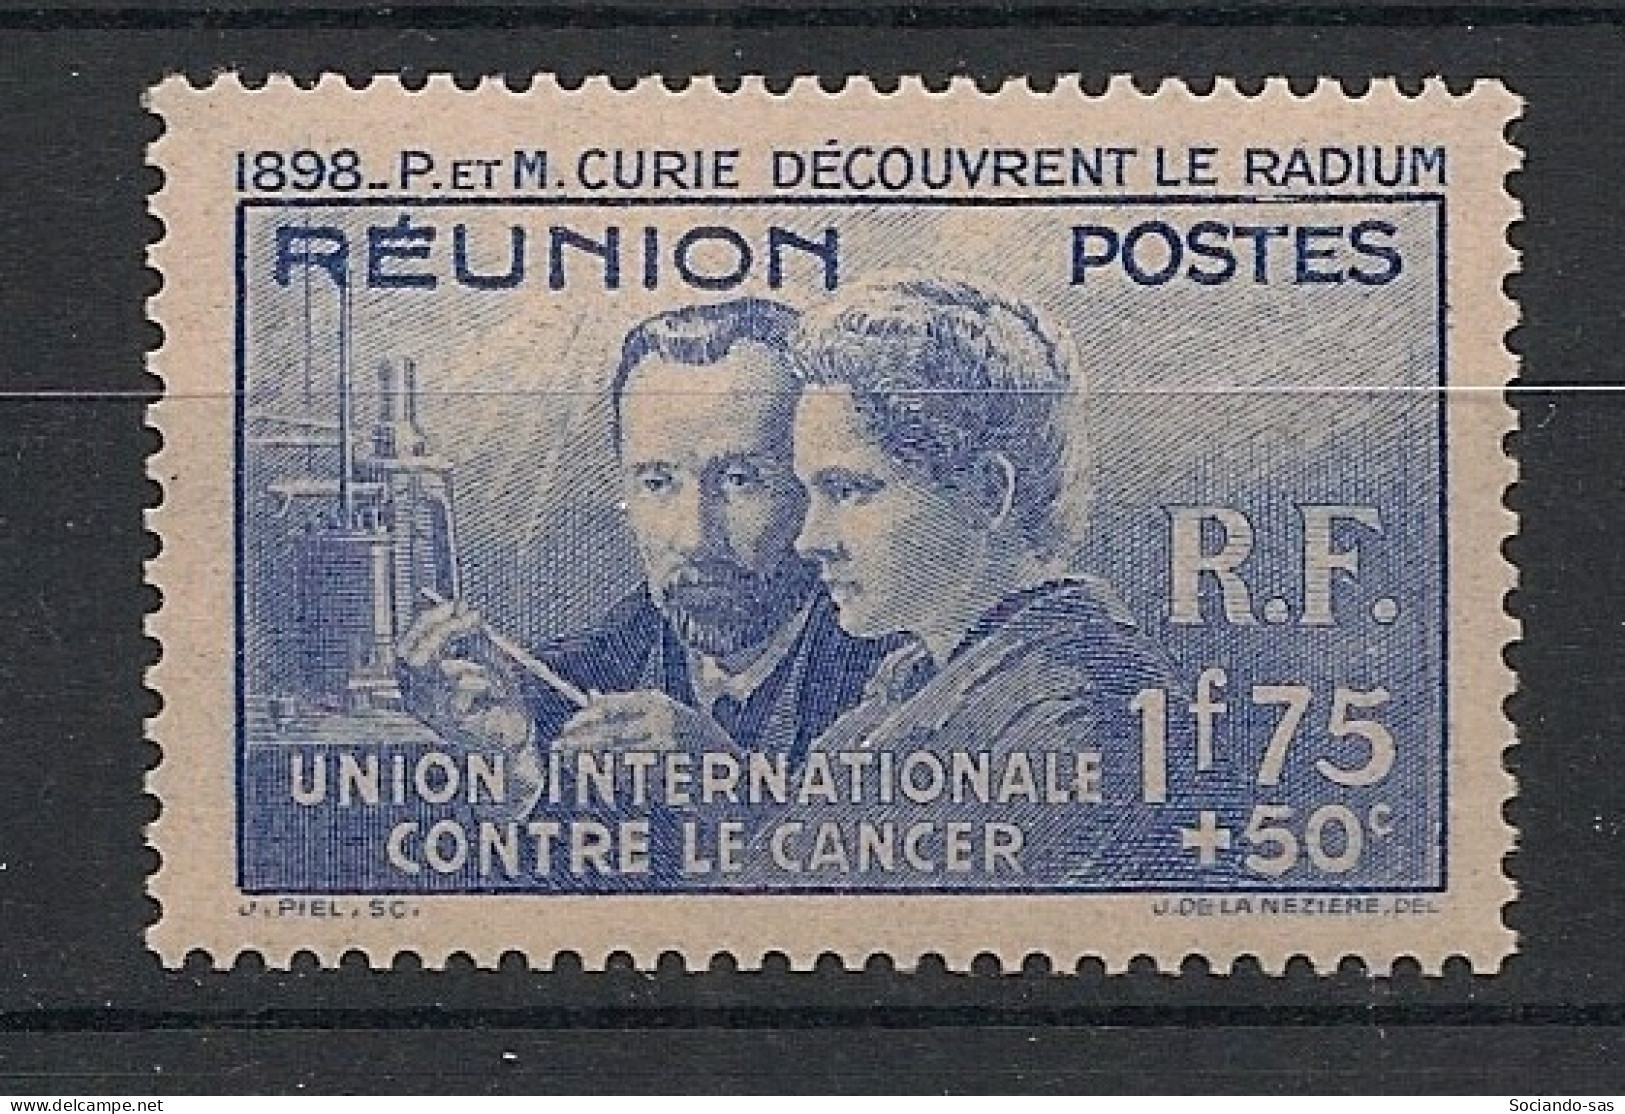 REUNION - 1938 - N°YT. 155 - Marie Curie - Neuf Luxe ** / MNH / Postfrisch - Unused Stamps